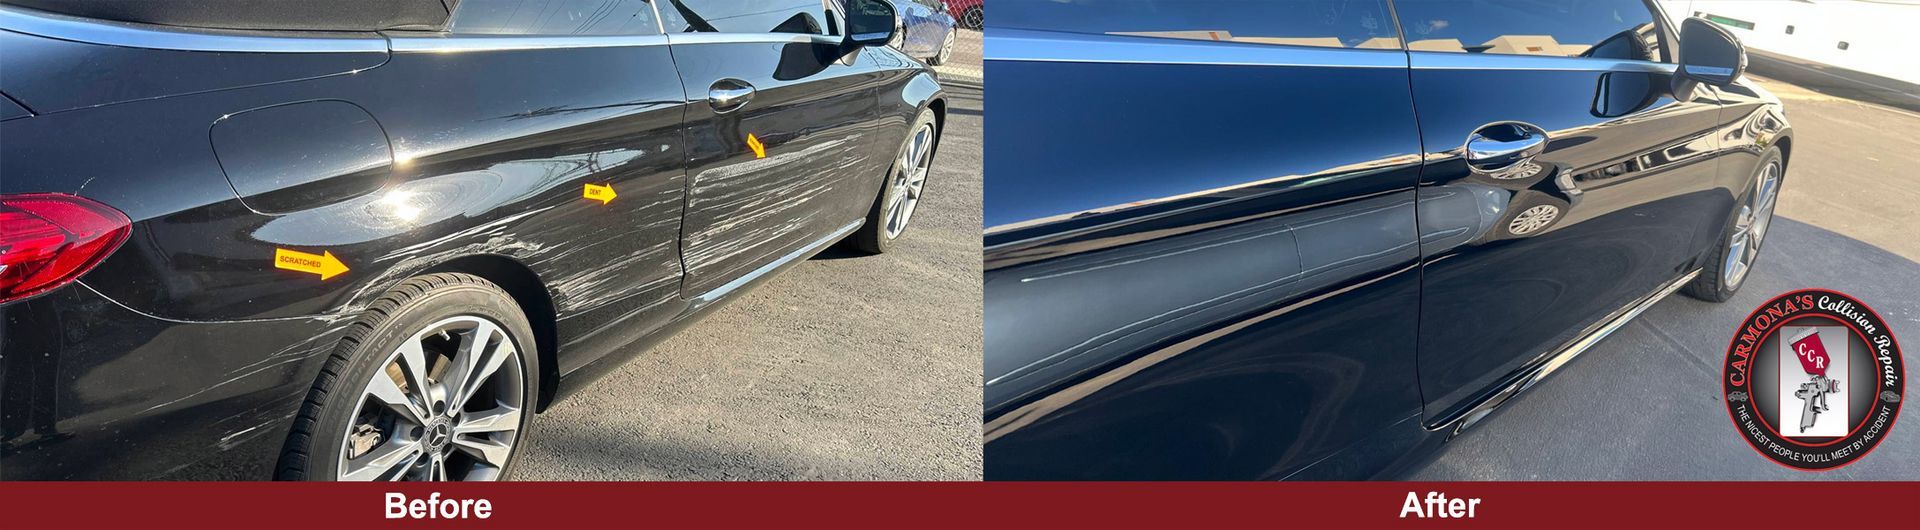 A before and after photo of a black car after it had been damaged in a minor accident.